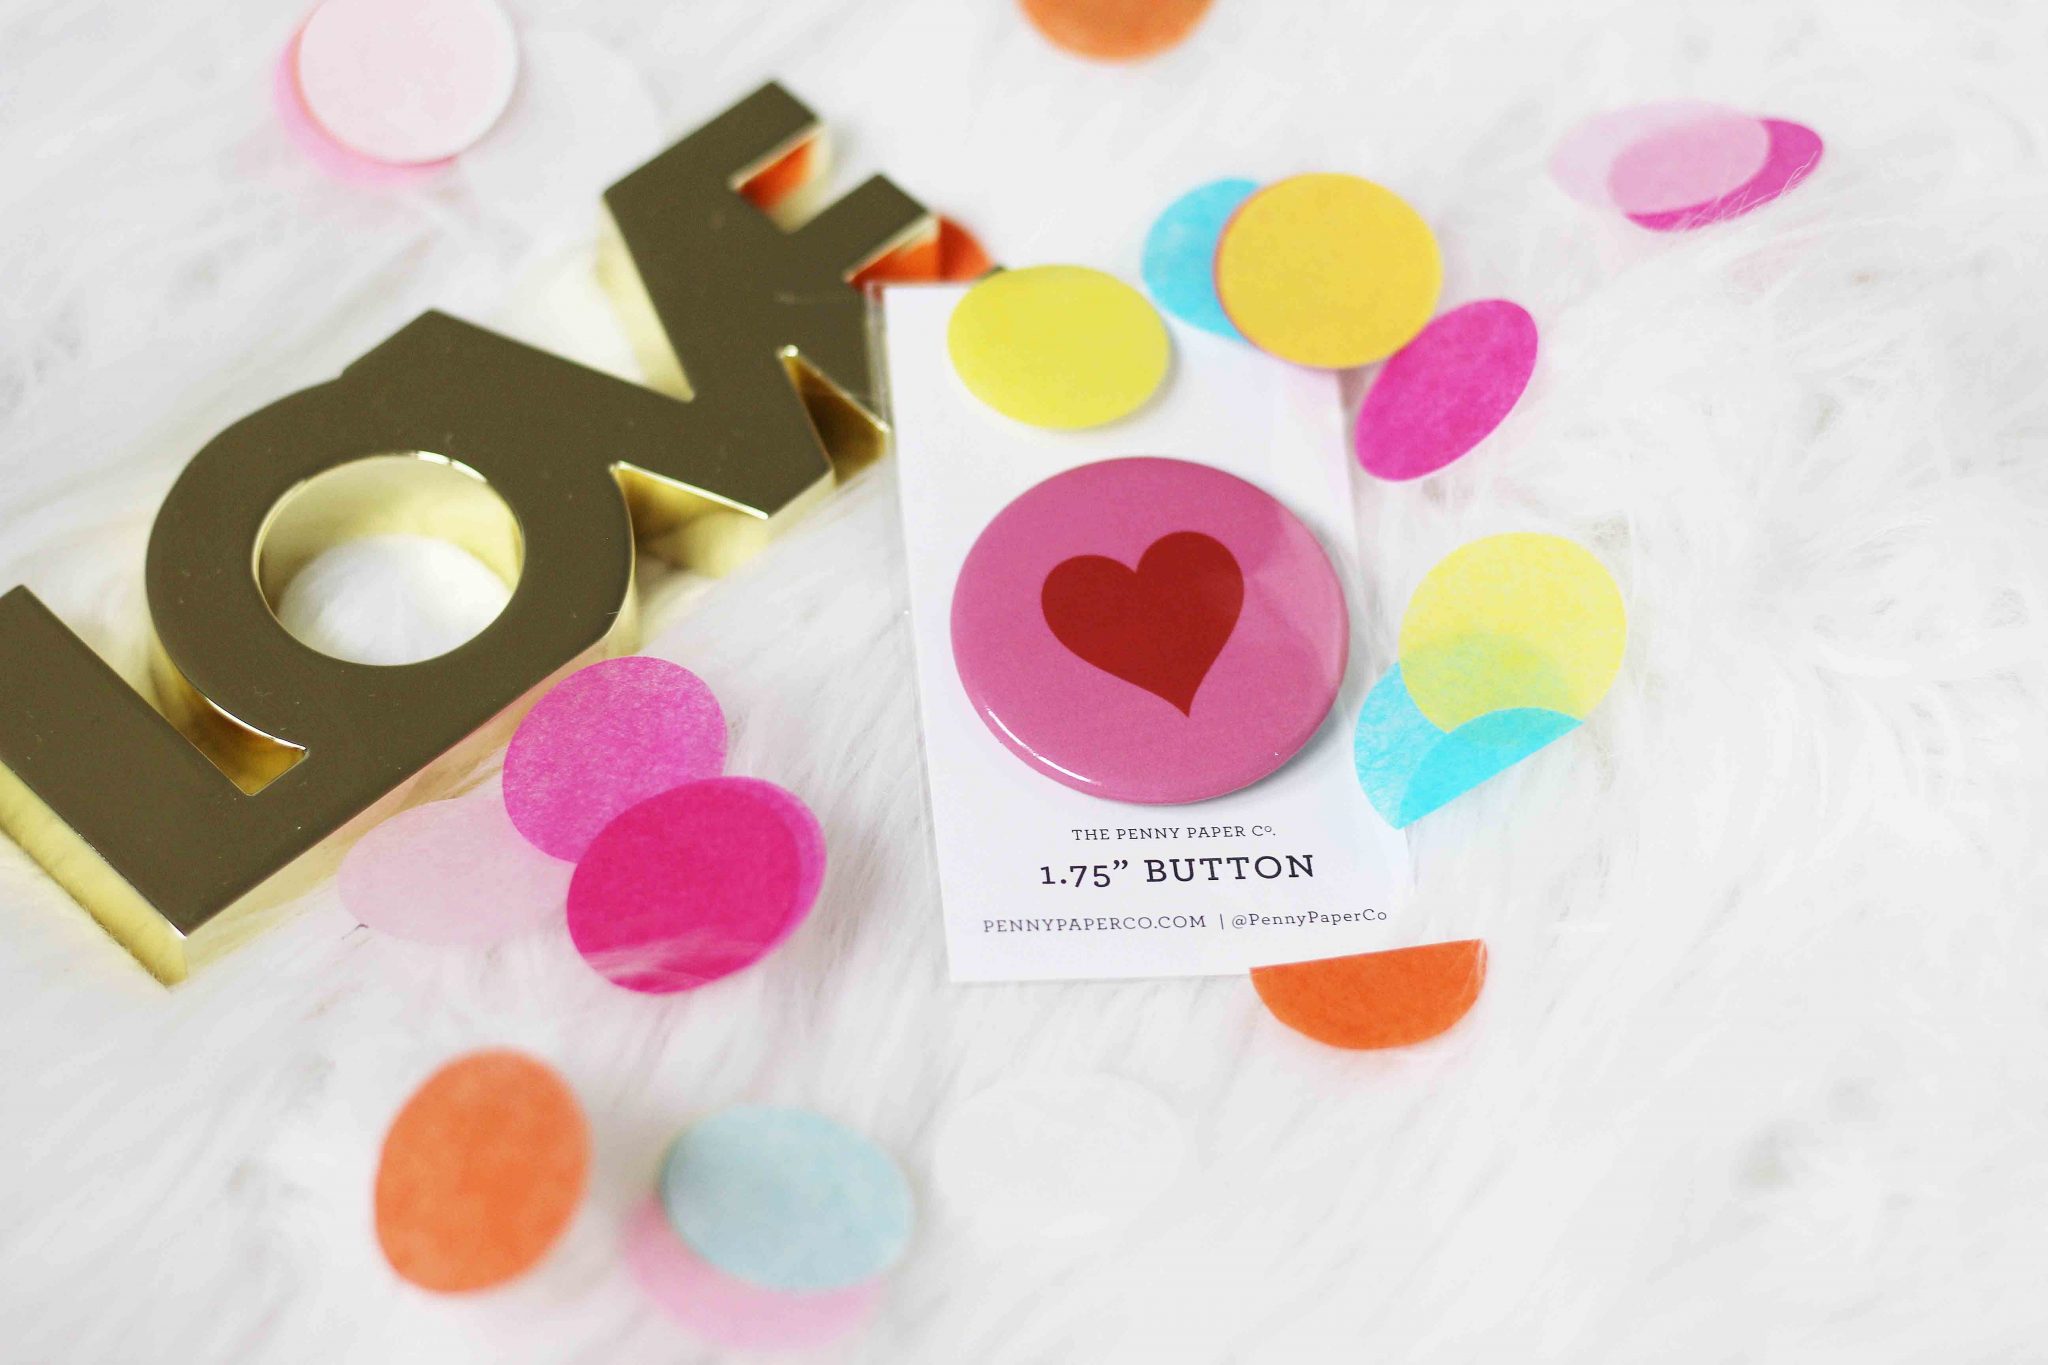 The Penny Paper Co. Valentine's Day Gifts